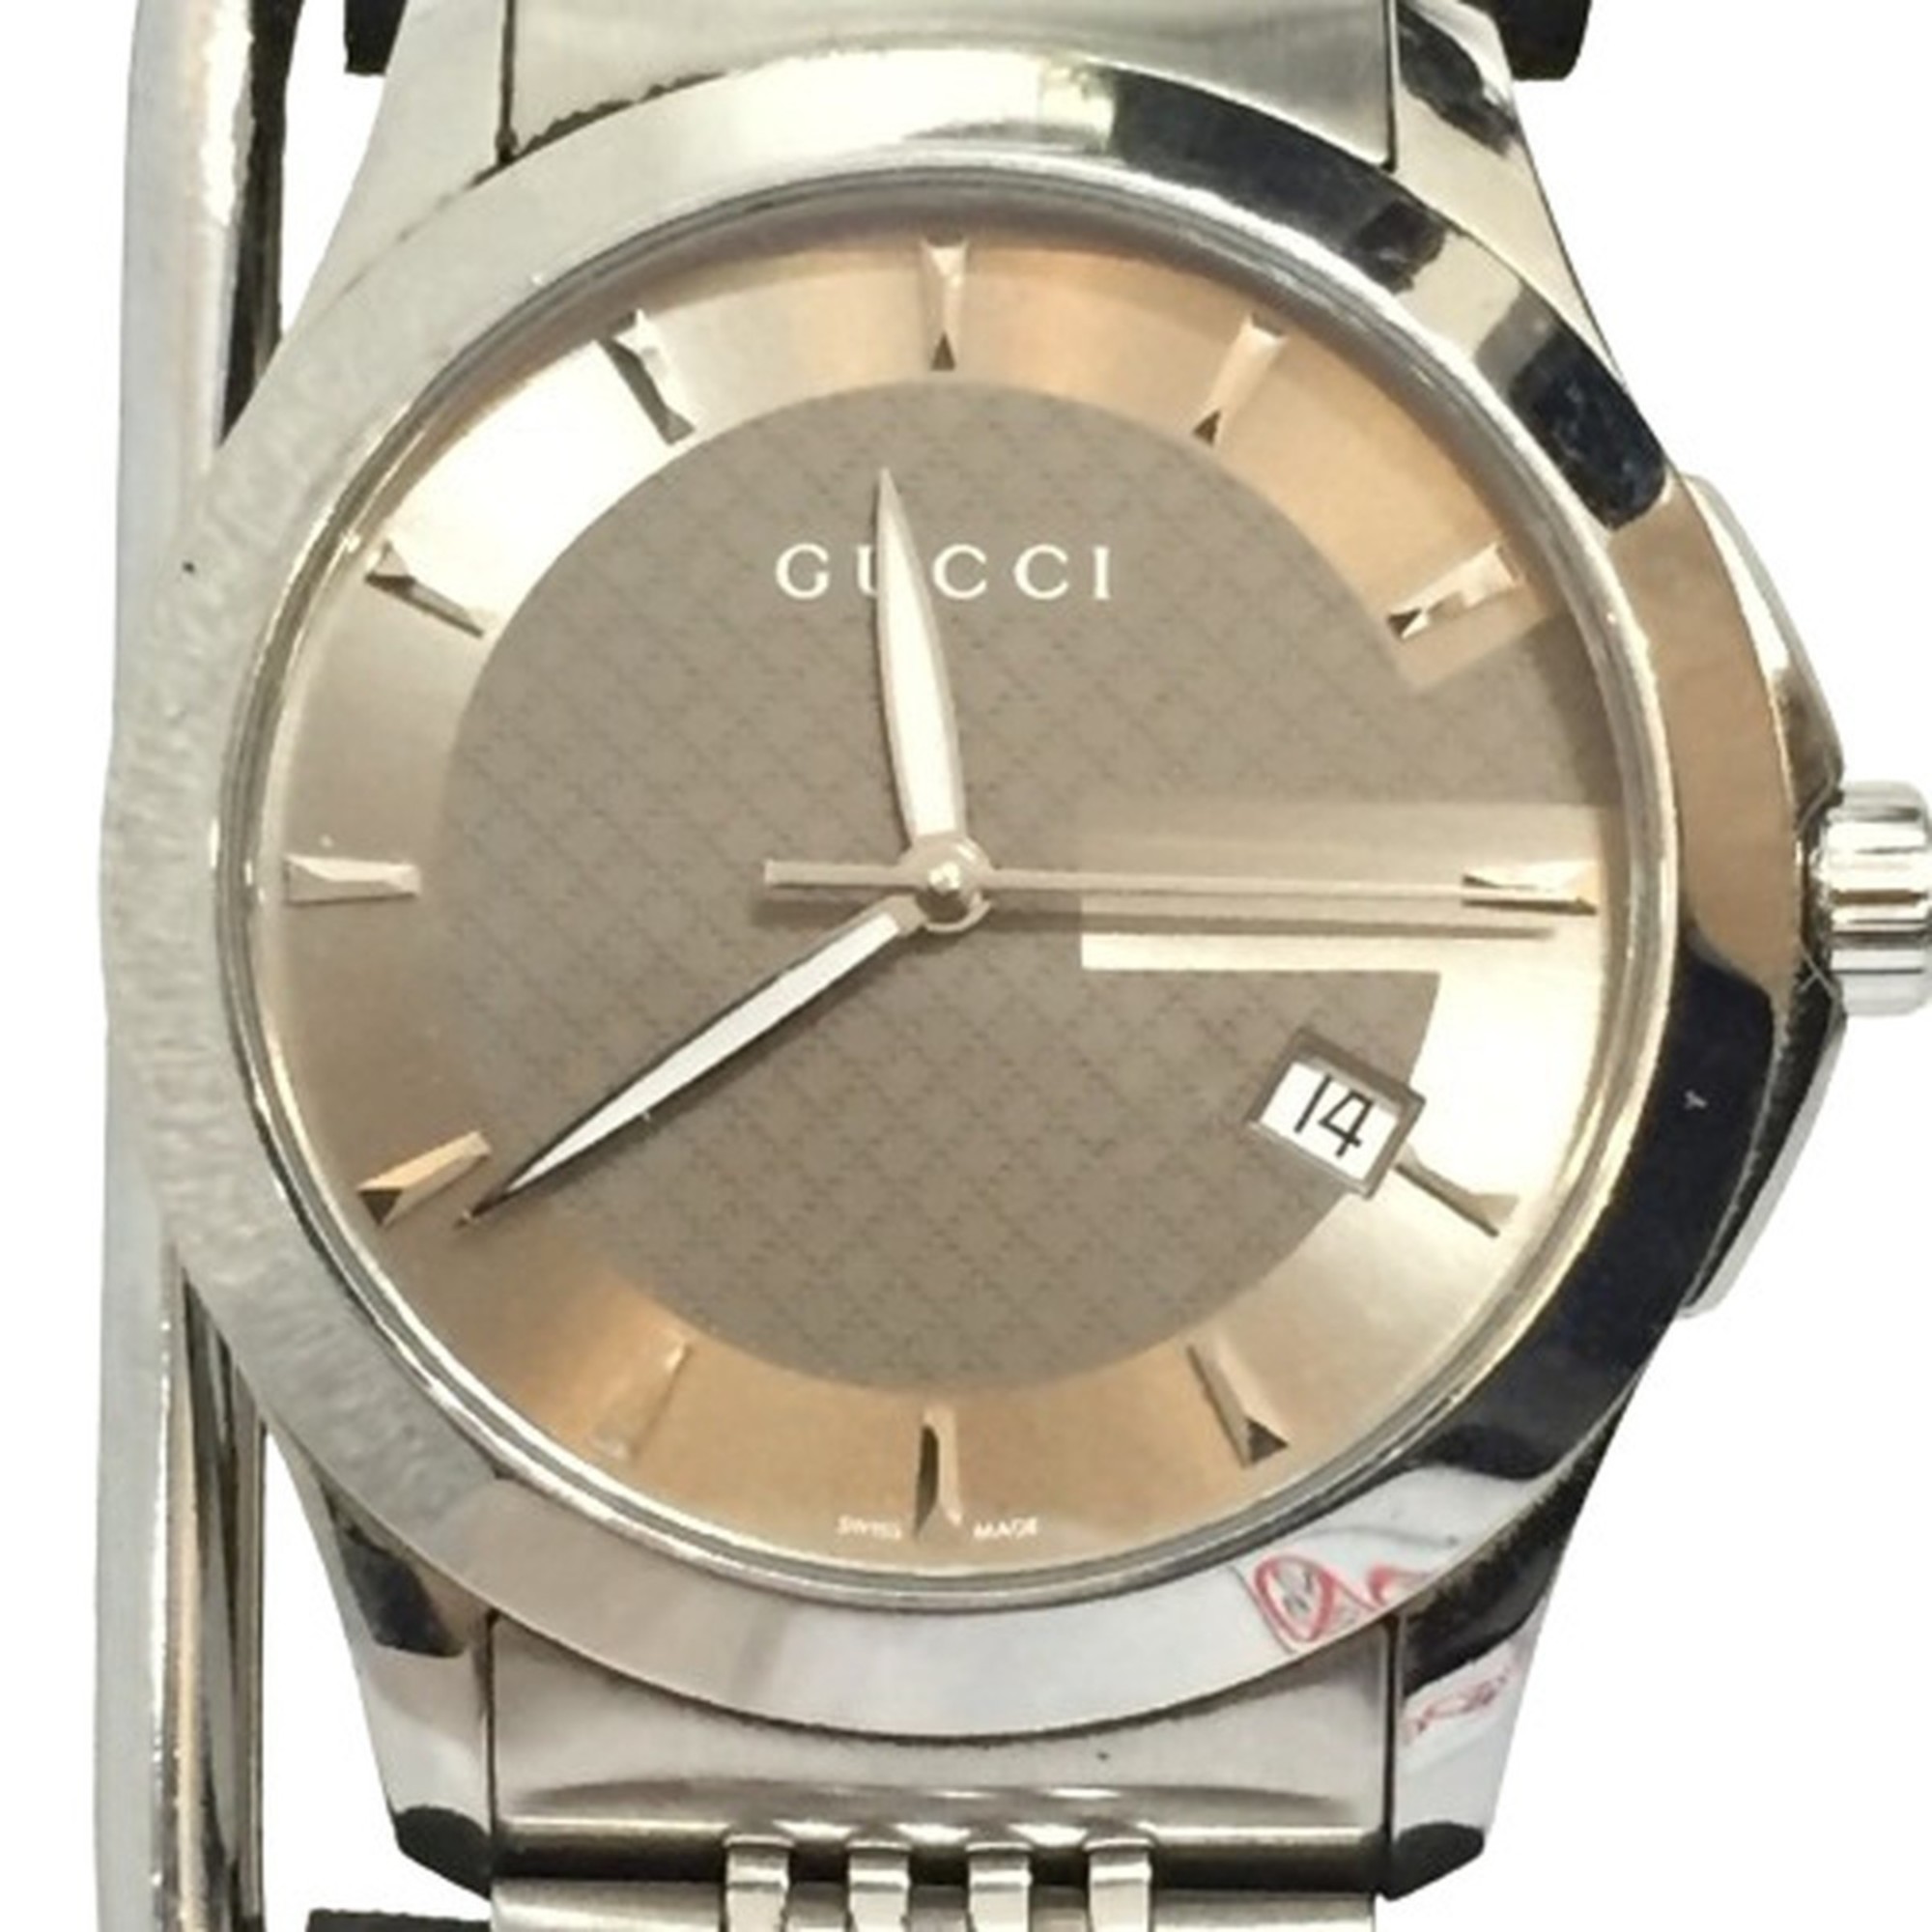 GUCCI 126.4 G Timeless Brown Dial SS Stainless Steel Silver Analog Watch Men's Date Quartz IT26SVZ67548 RK1056D